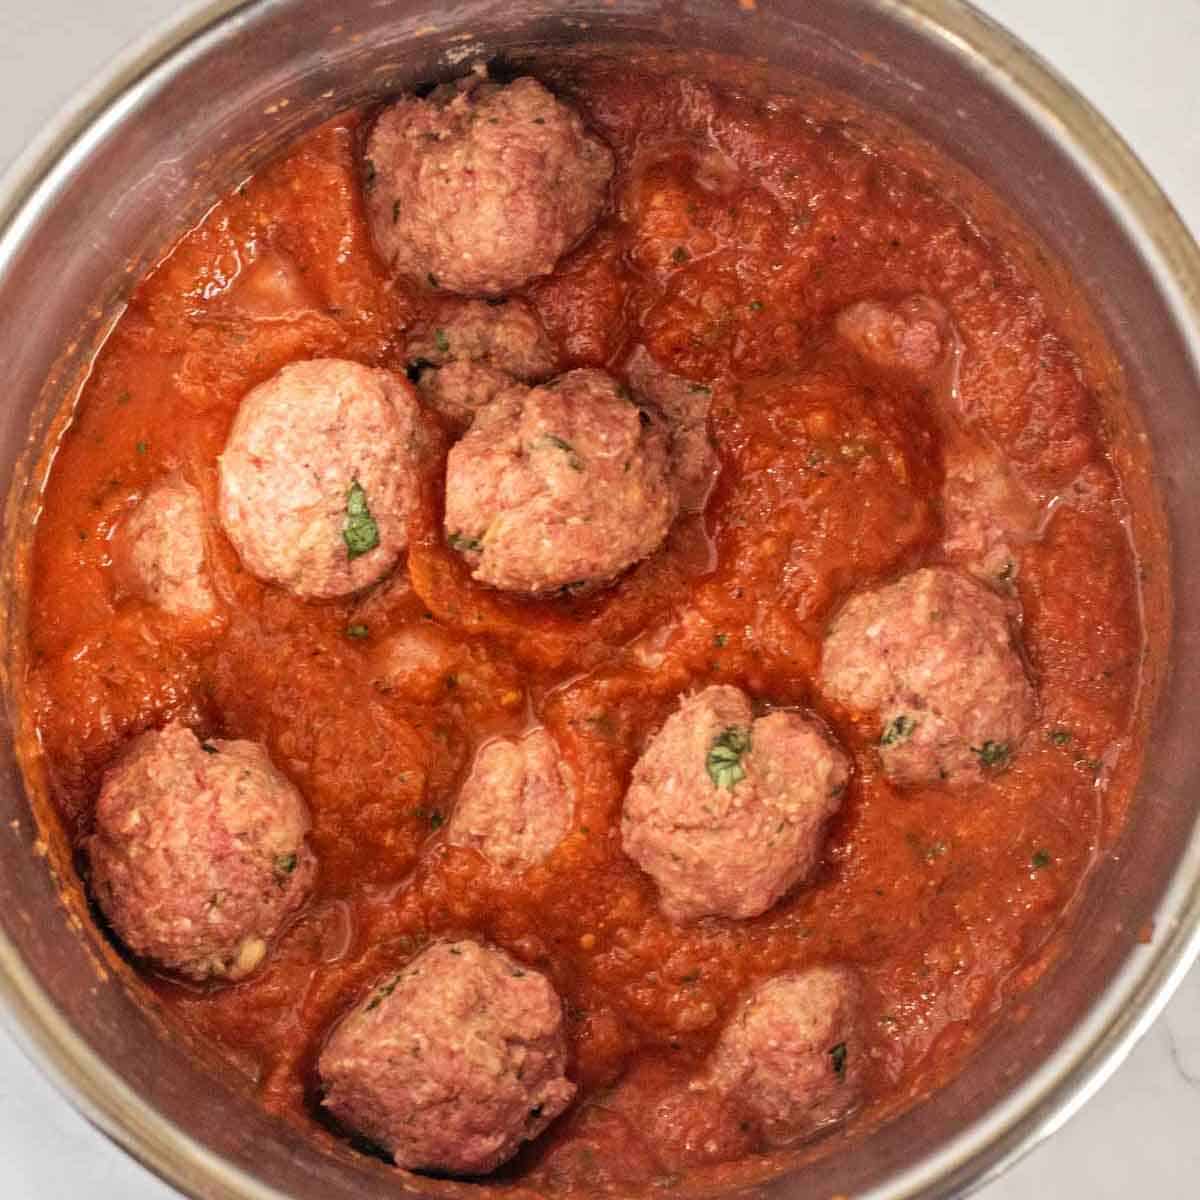 An instant pot with the cooking meatballs in the sauce.